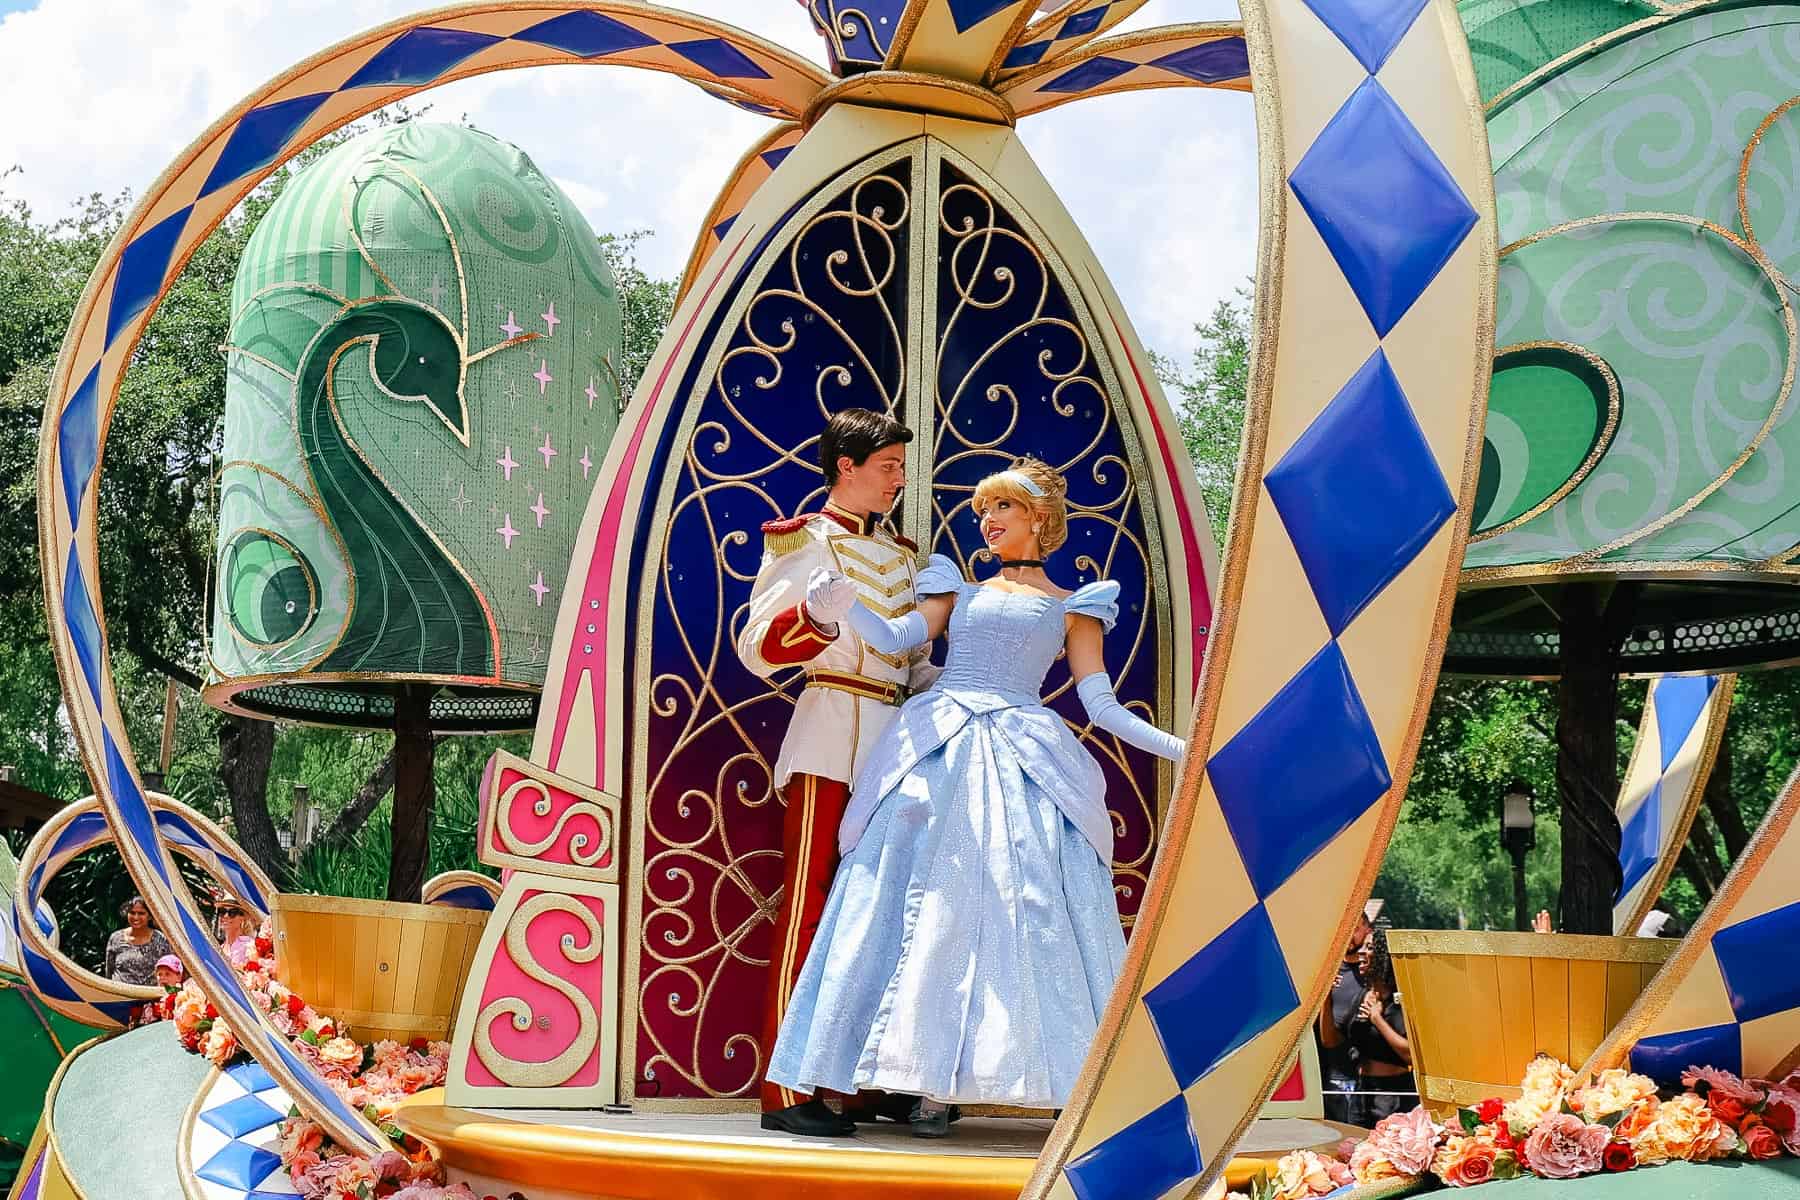 Cinderella with Prince Charming in the Festival of Fantasy Parade 